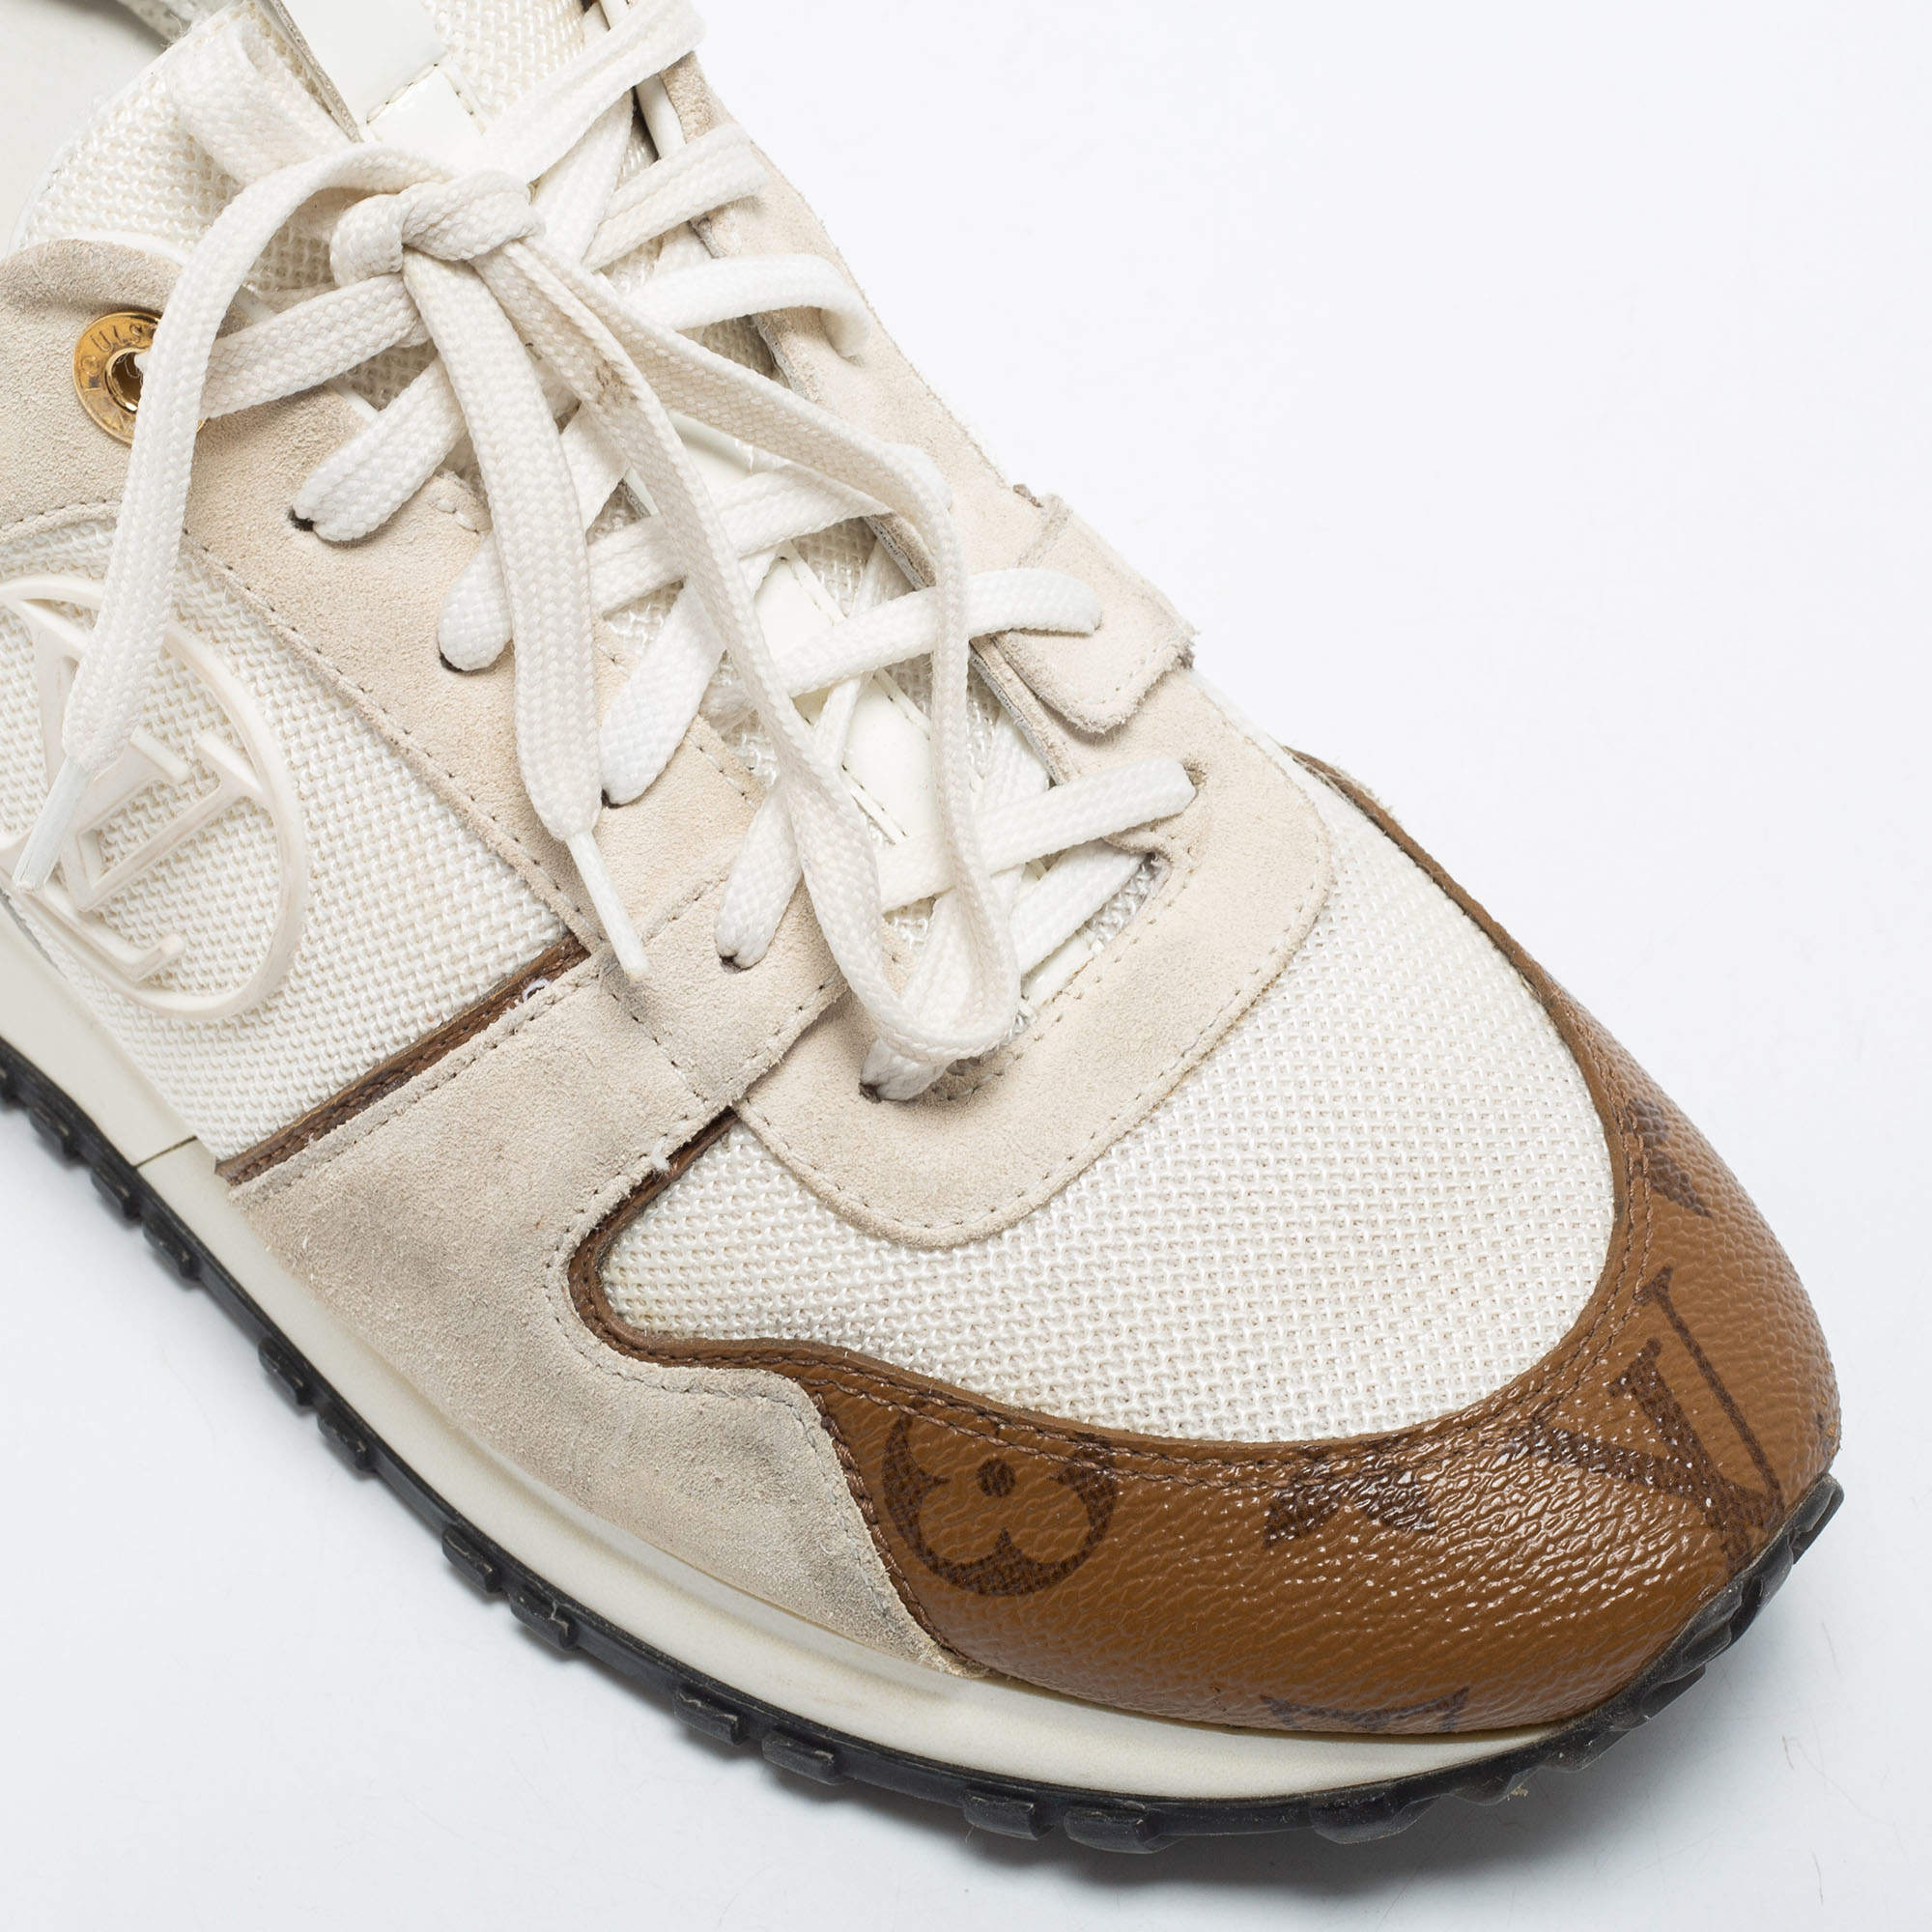 Louis Vuitton White/Brown Patent Leather, Suede, Mesh and Monogram Canvas  Run Away Sneakers Size 39 Louis Vuitton